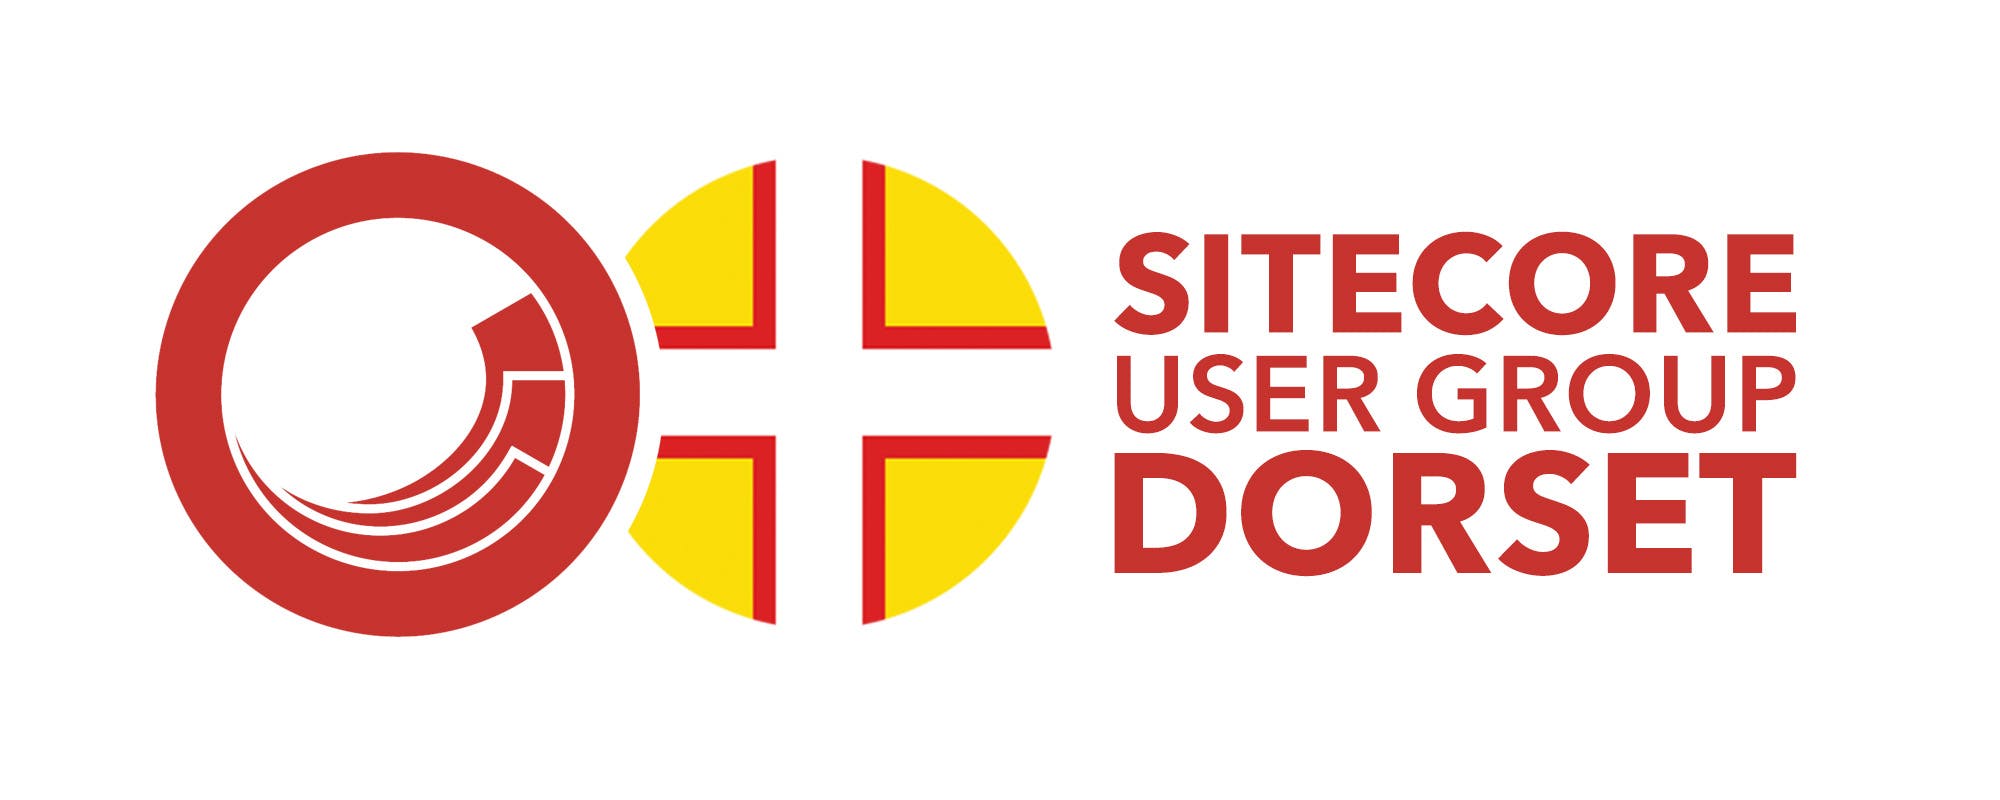 Cover Image for Sitecore User Group Dorset